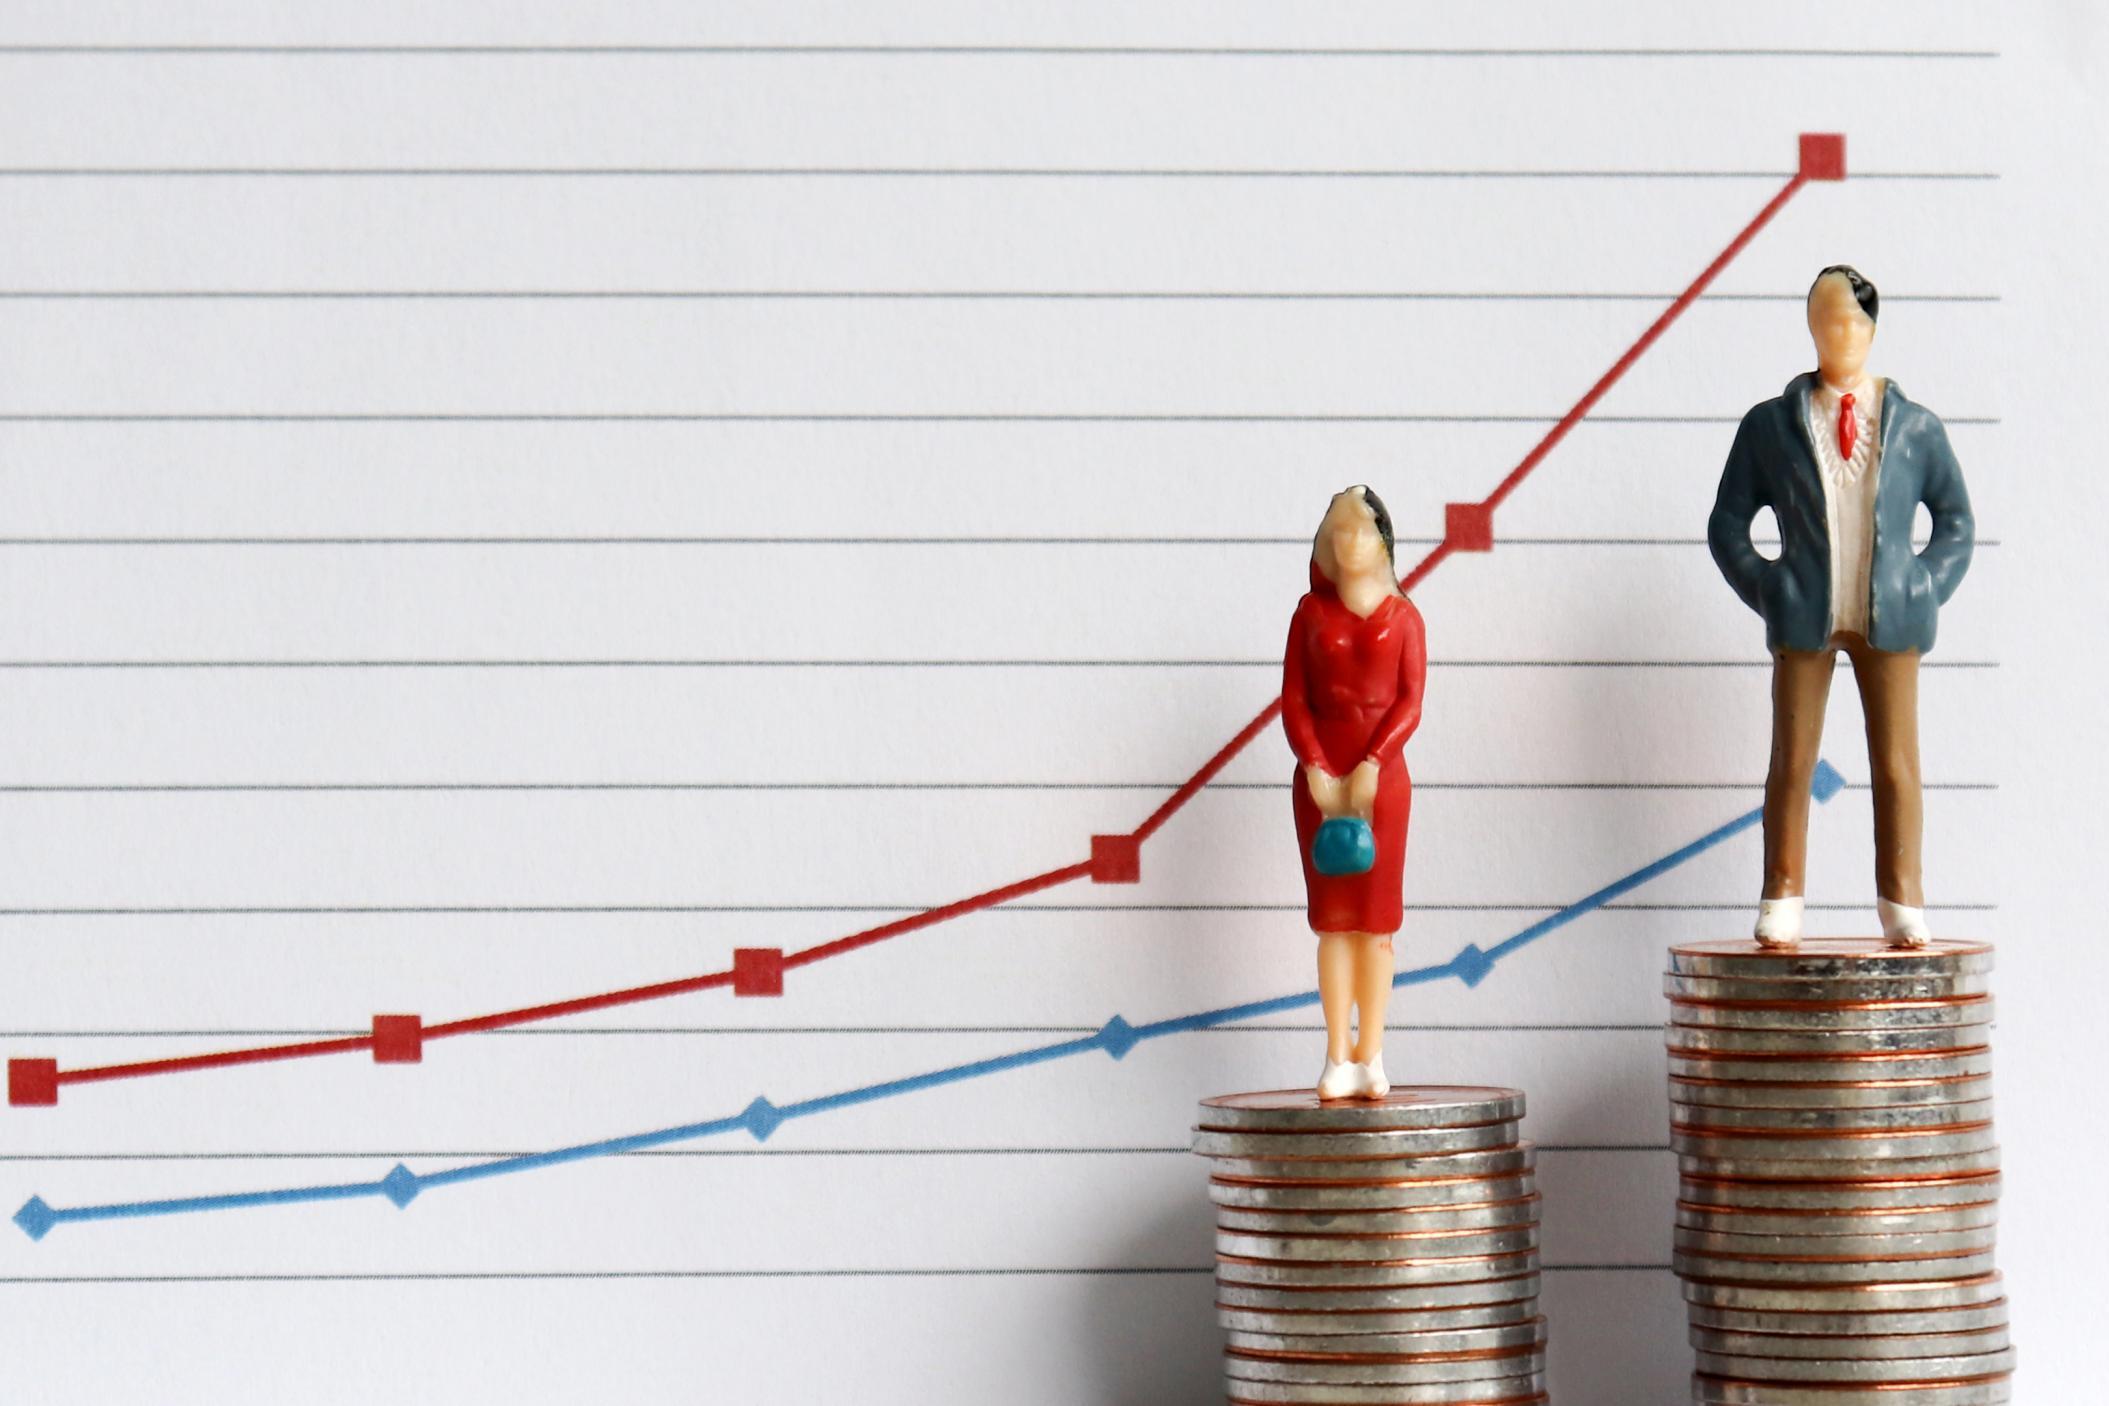 New figures show the gender pay gap has widened